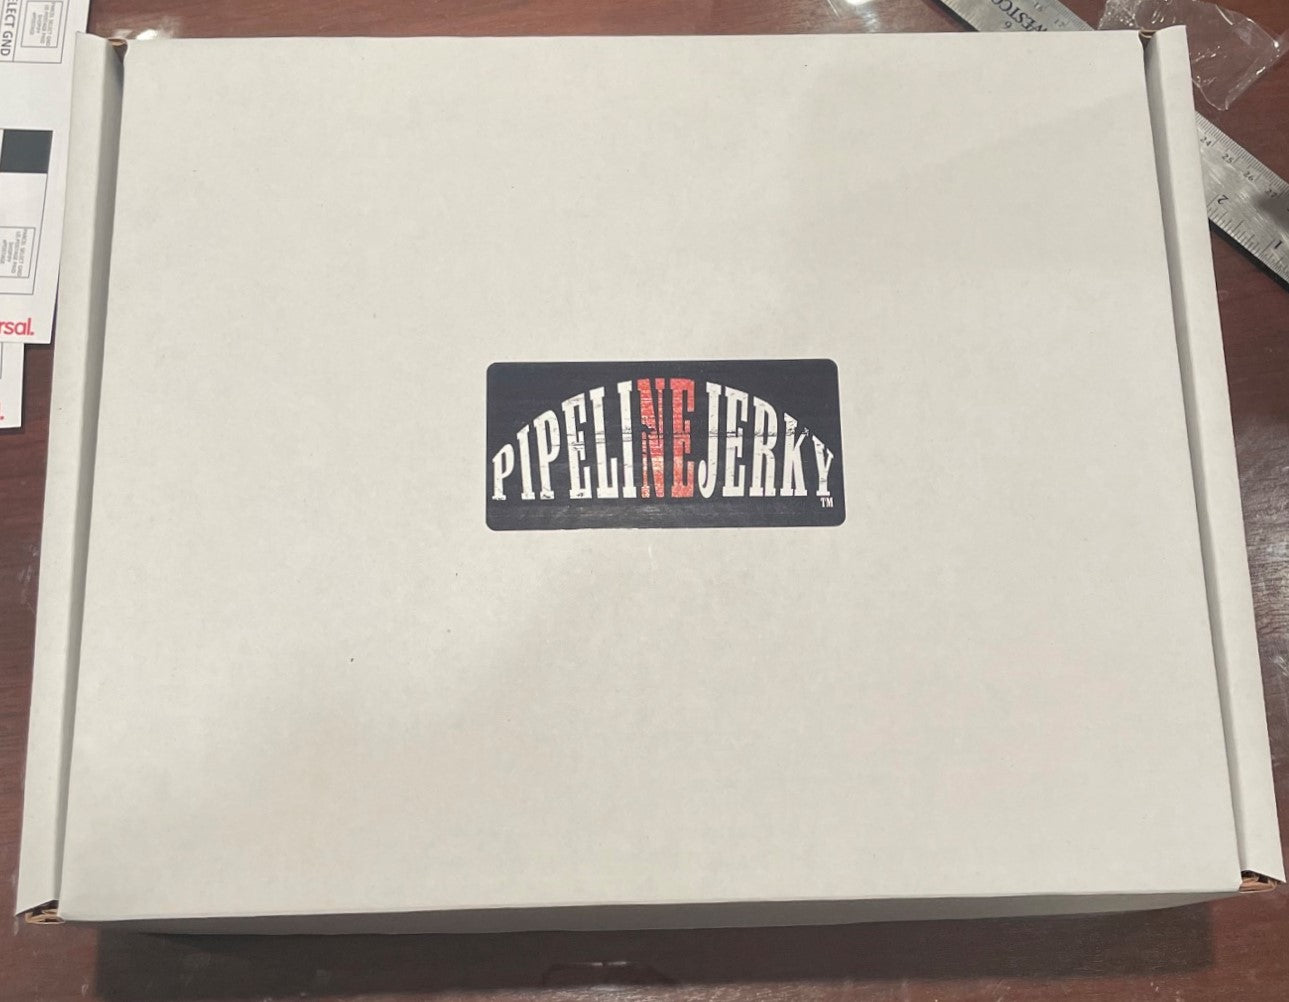 The Biggest Pipeline Gift Box